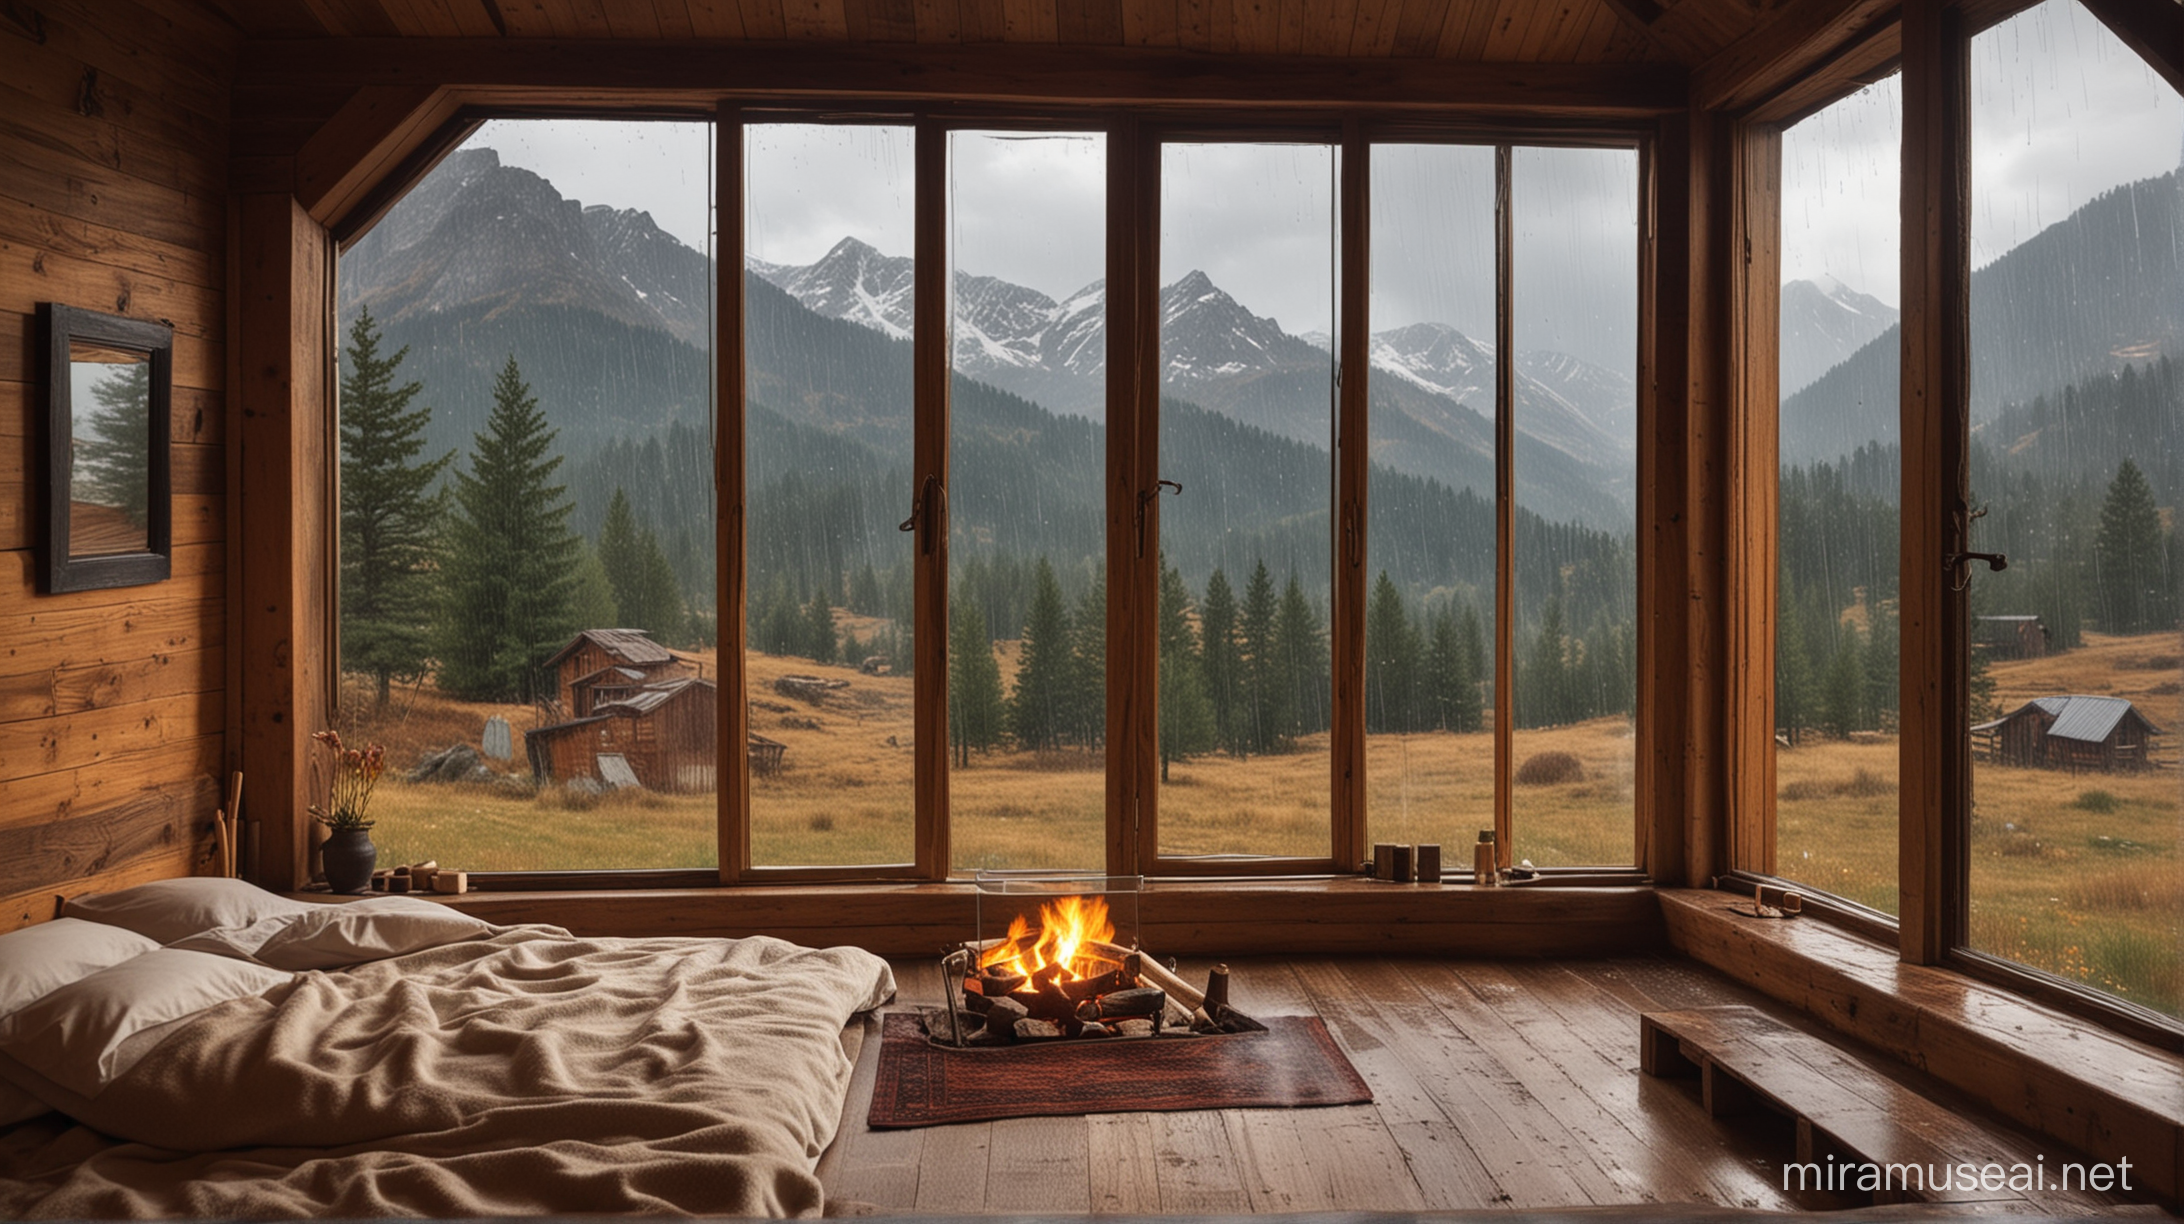 Cozy Wooden Room with Mountain Valley View Rainy Evening by the Fireplace